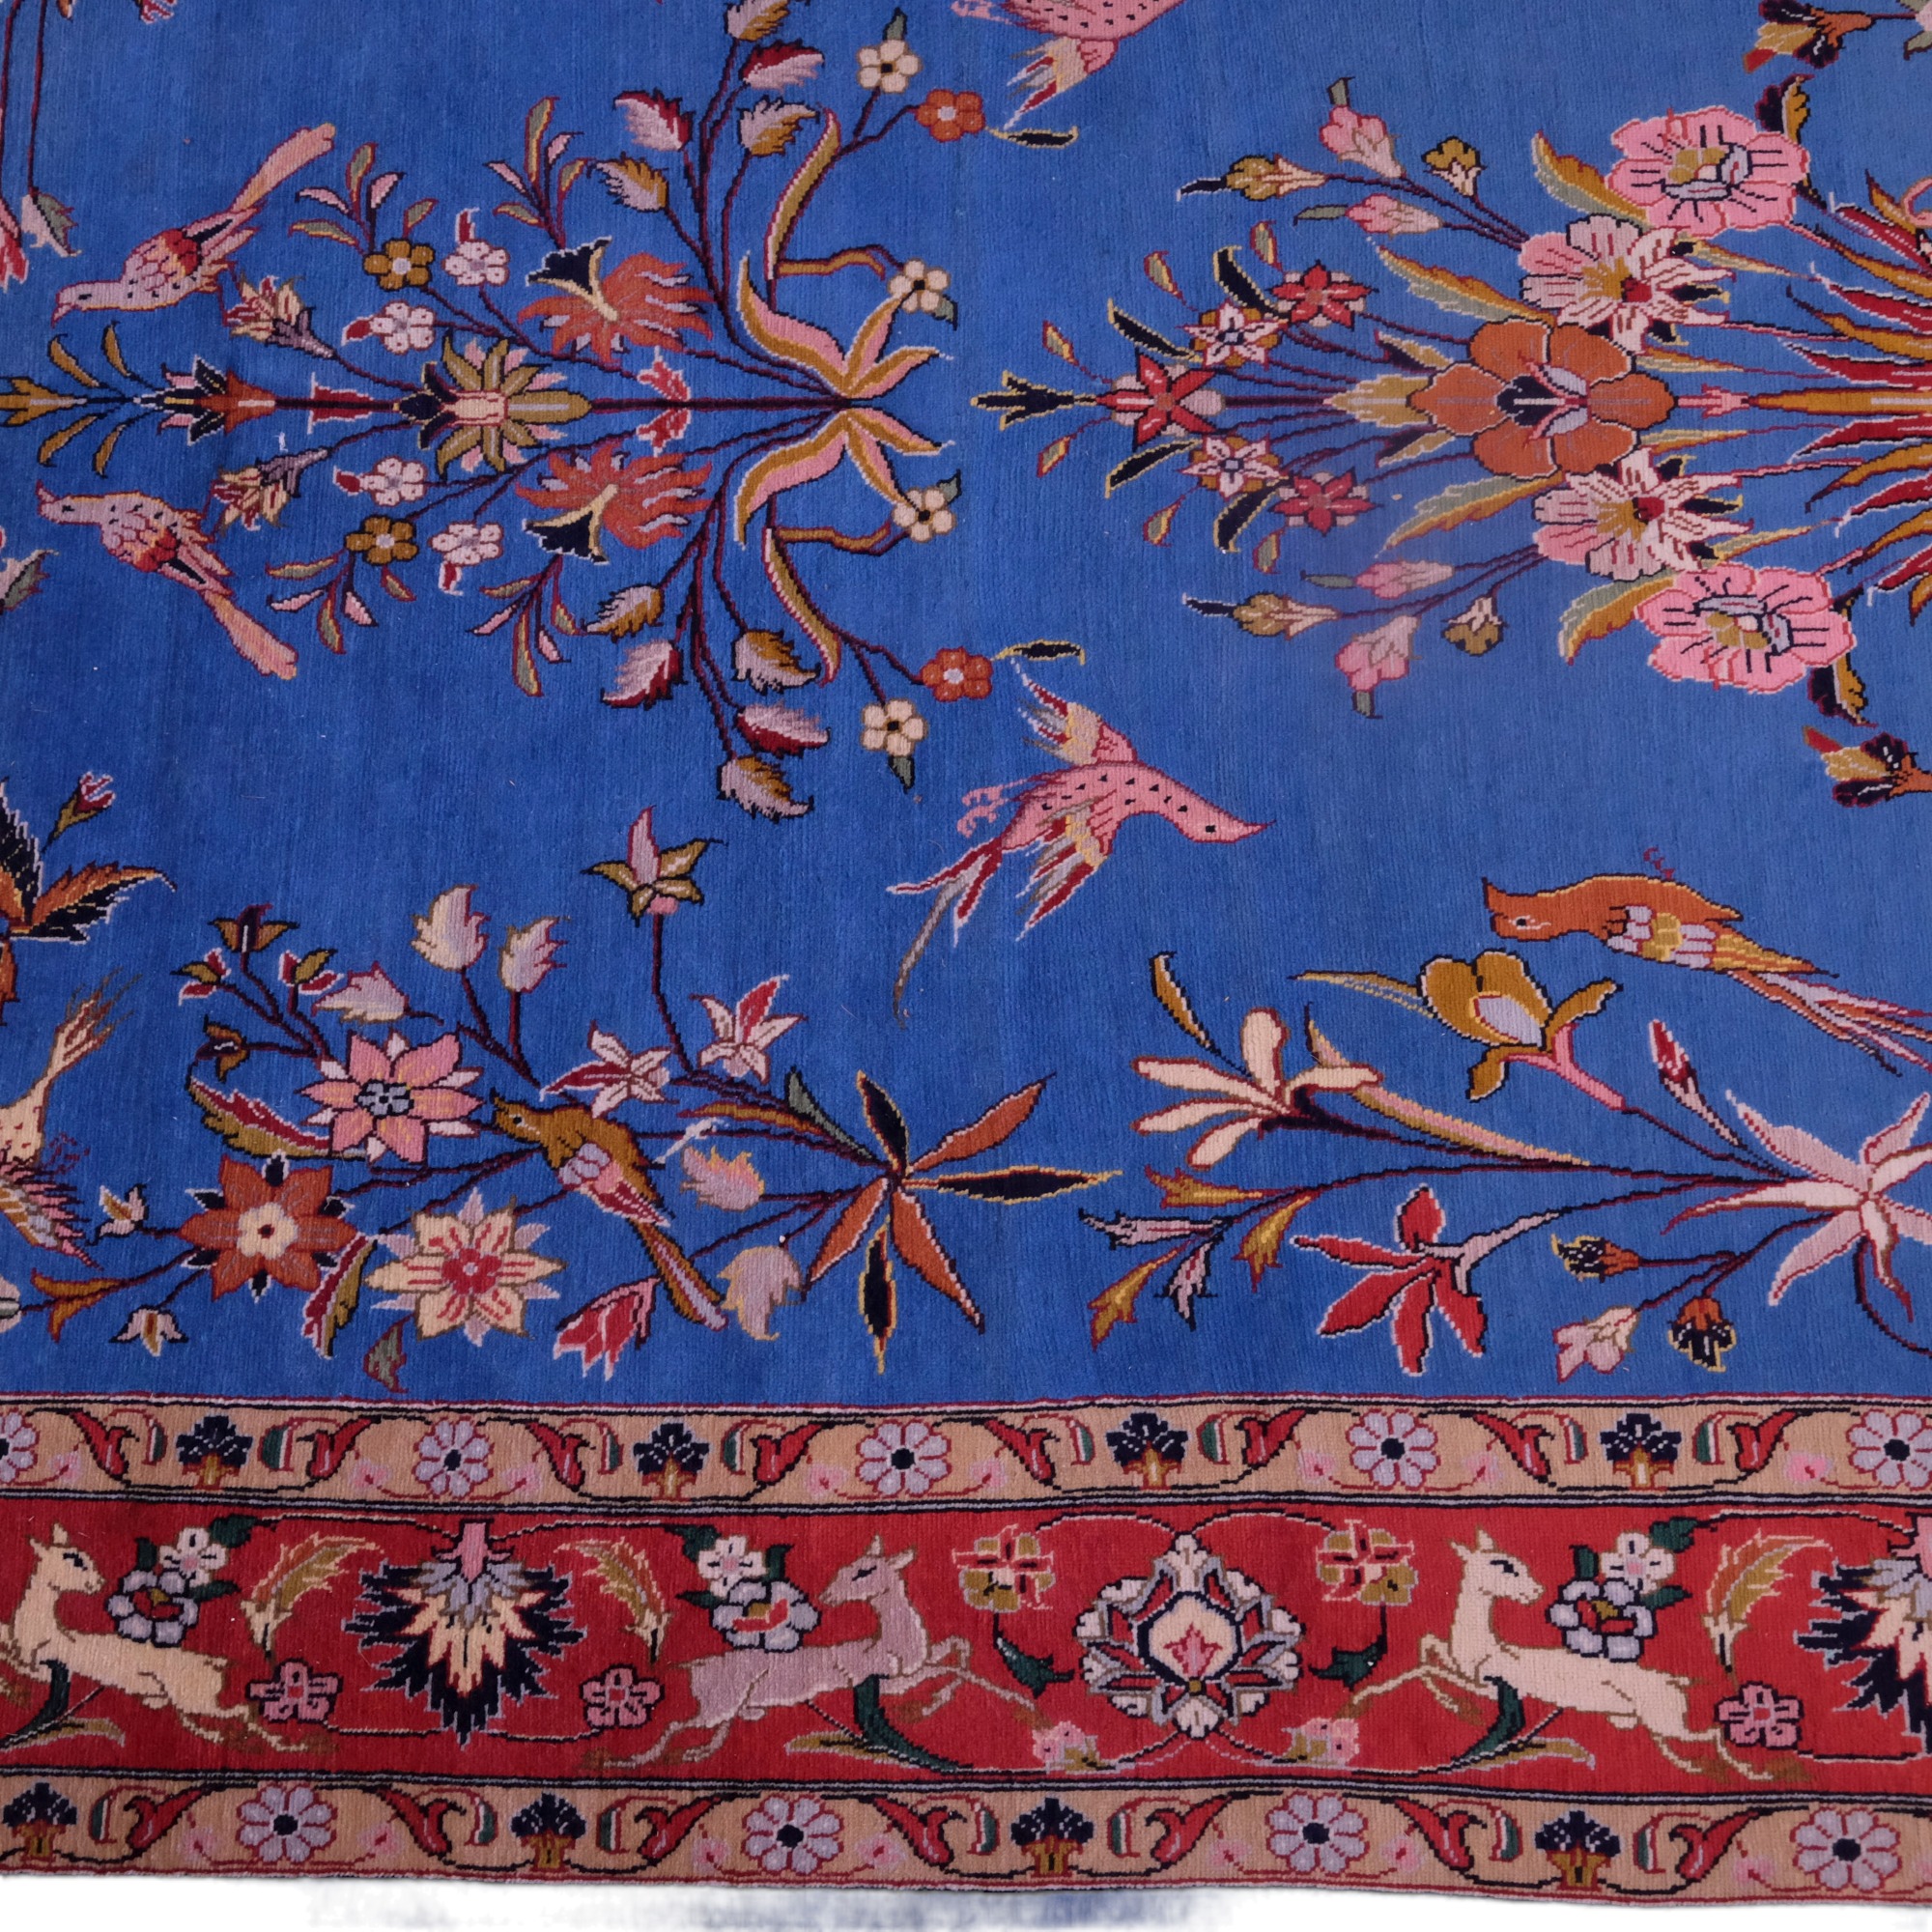 A very fine antique Persian Sarough / Zaronim hand-knotted wool-pile rug, decorated with deer, fawn, - Image 3 of 10